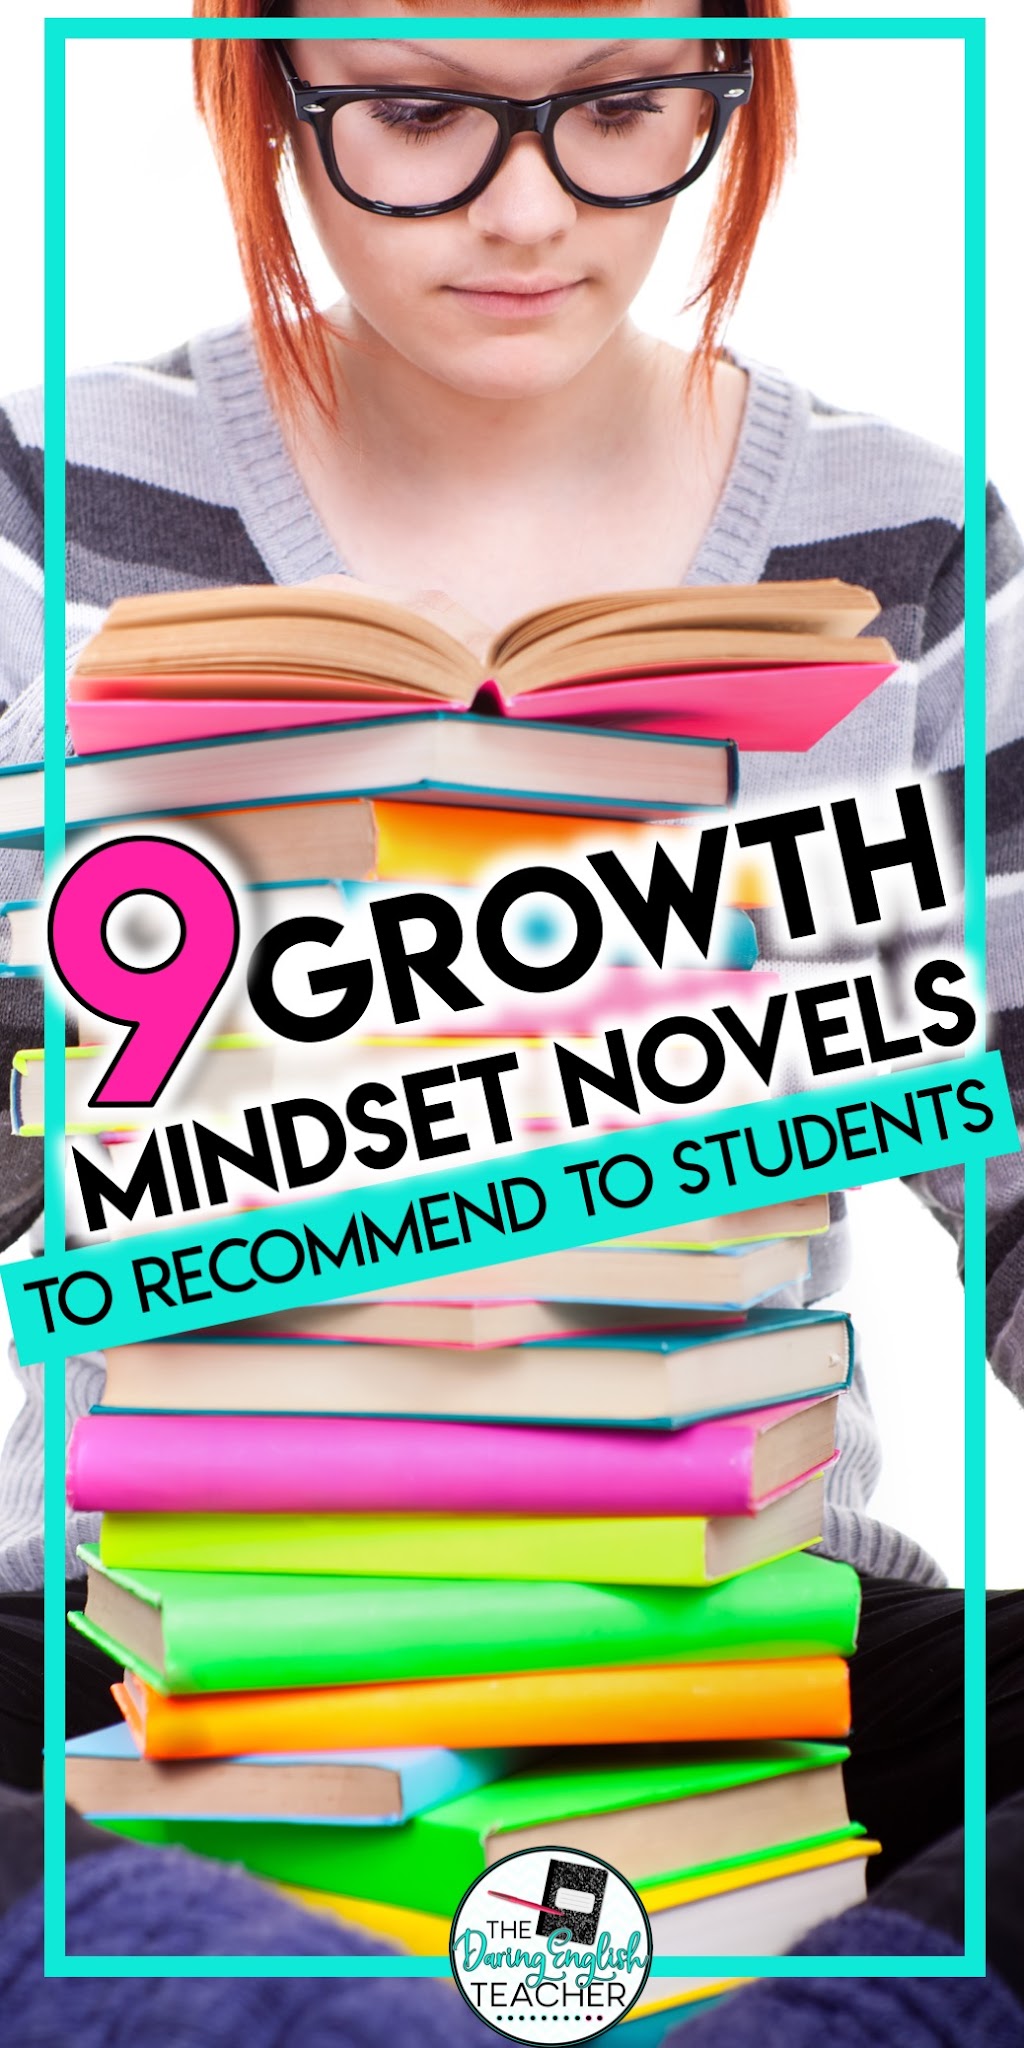 Nine Growth Mindset Novels to Recommend to Students